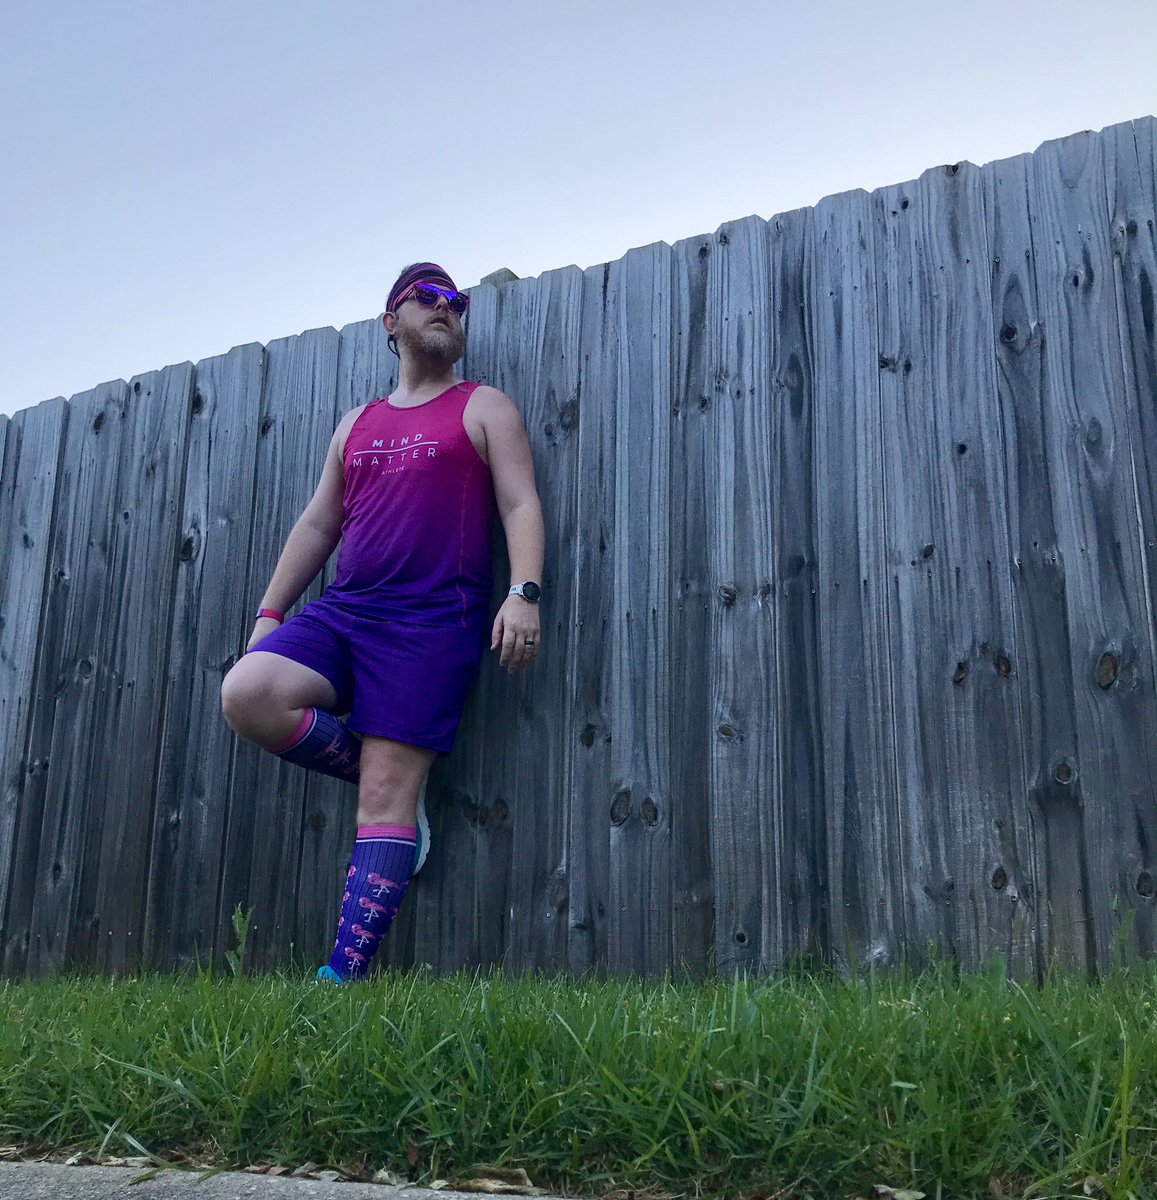 A leap forward. A step back. Just keep flocking going, whatever that looks like.

5 miles.🦩

#IStandWithYou #teamnuun #HSHive #PROAlumni #SquirrelsNutButter #shokzstar #shokzquad #TeamROADiD #TeamULTRA #LeagueOfGarmin #RunChat #RunMatchy #WeRunSocial #IHeartTally